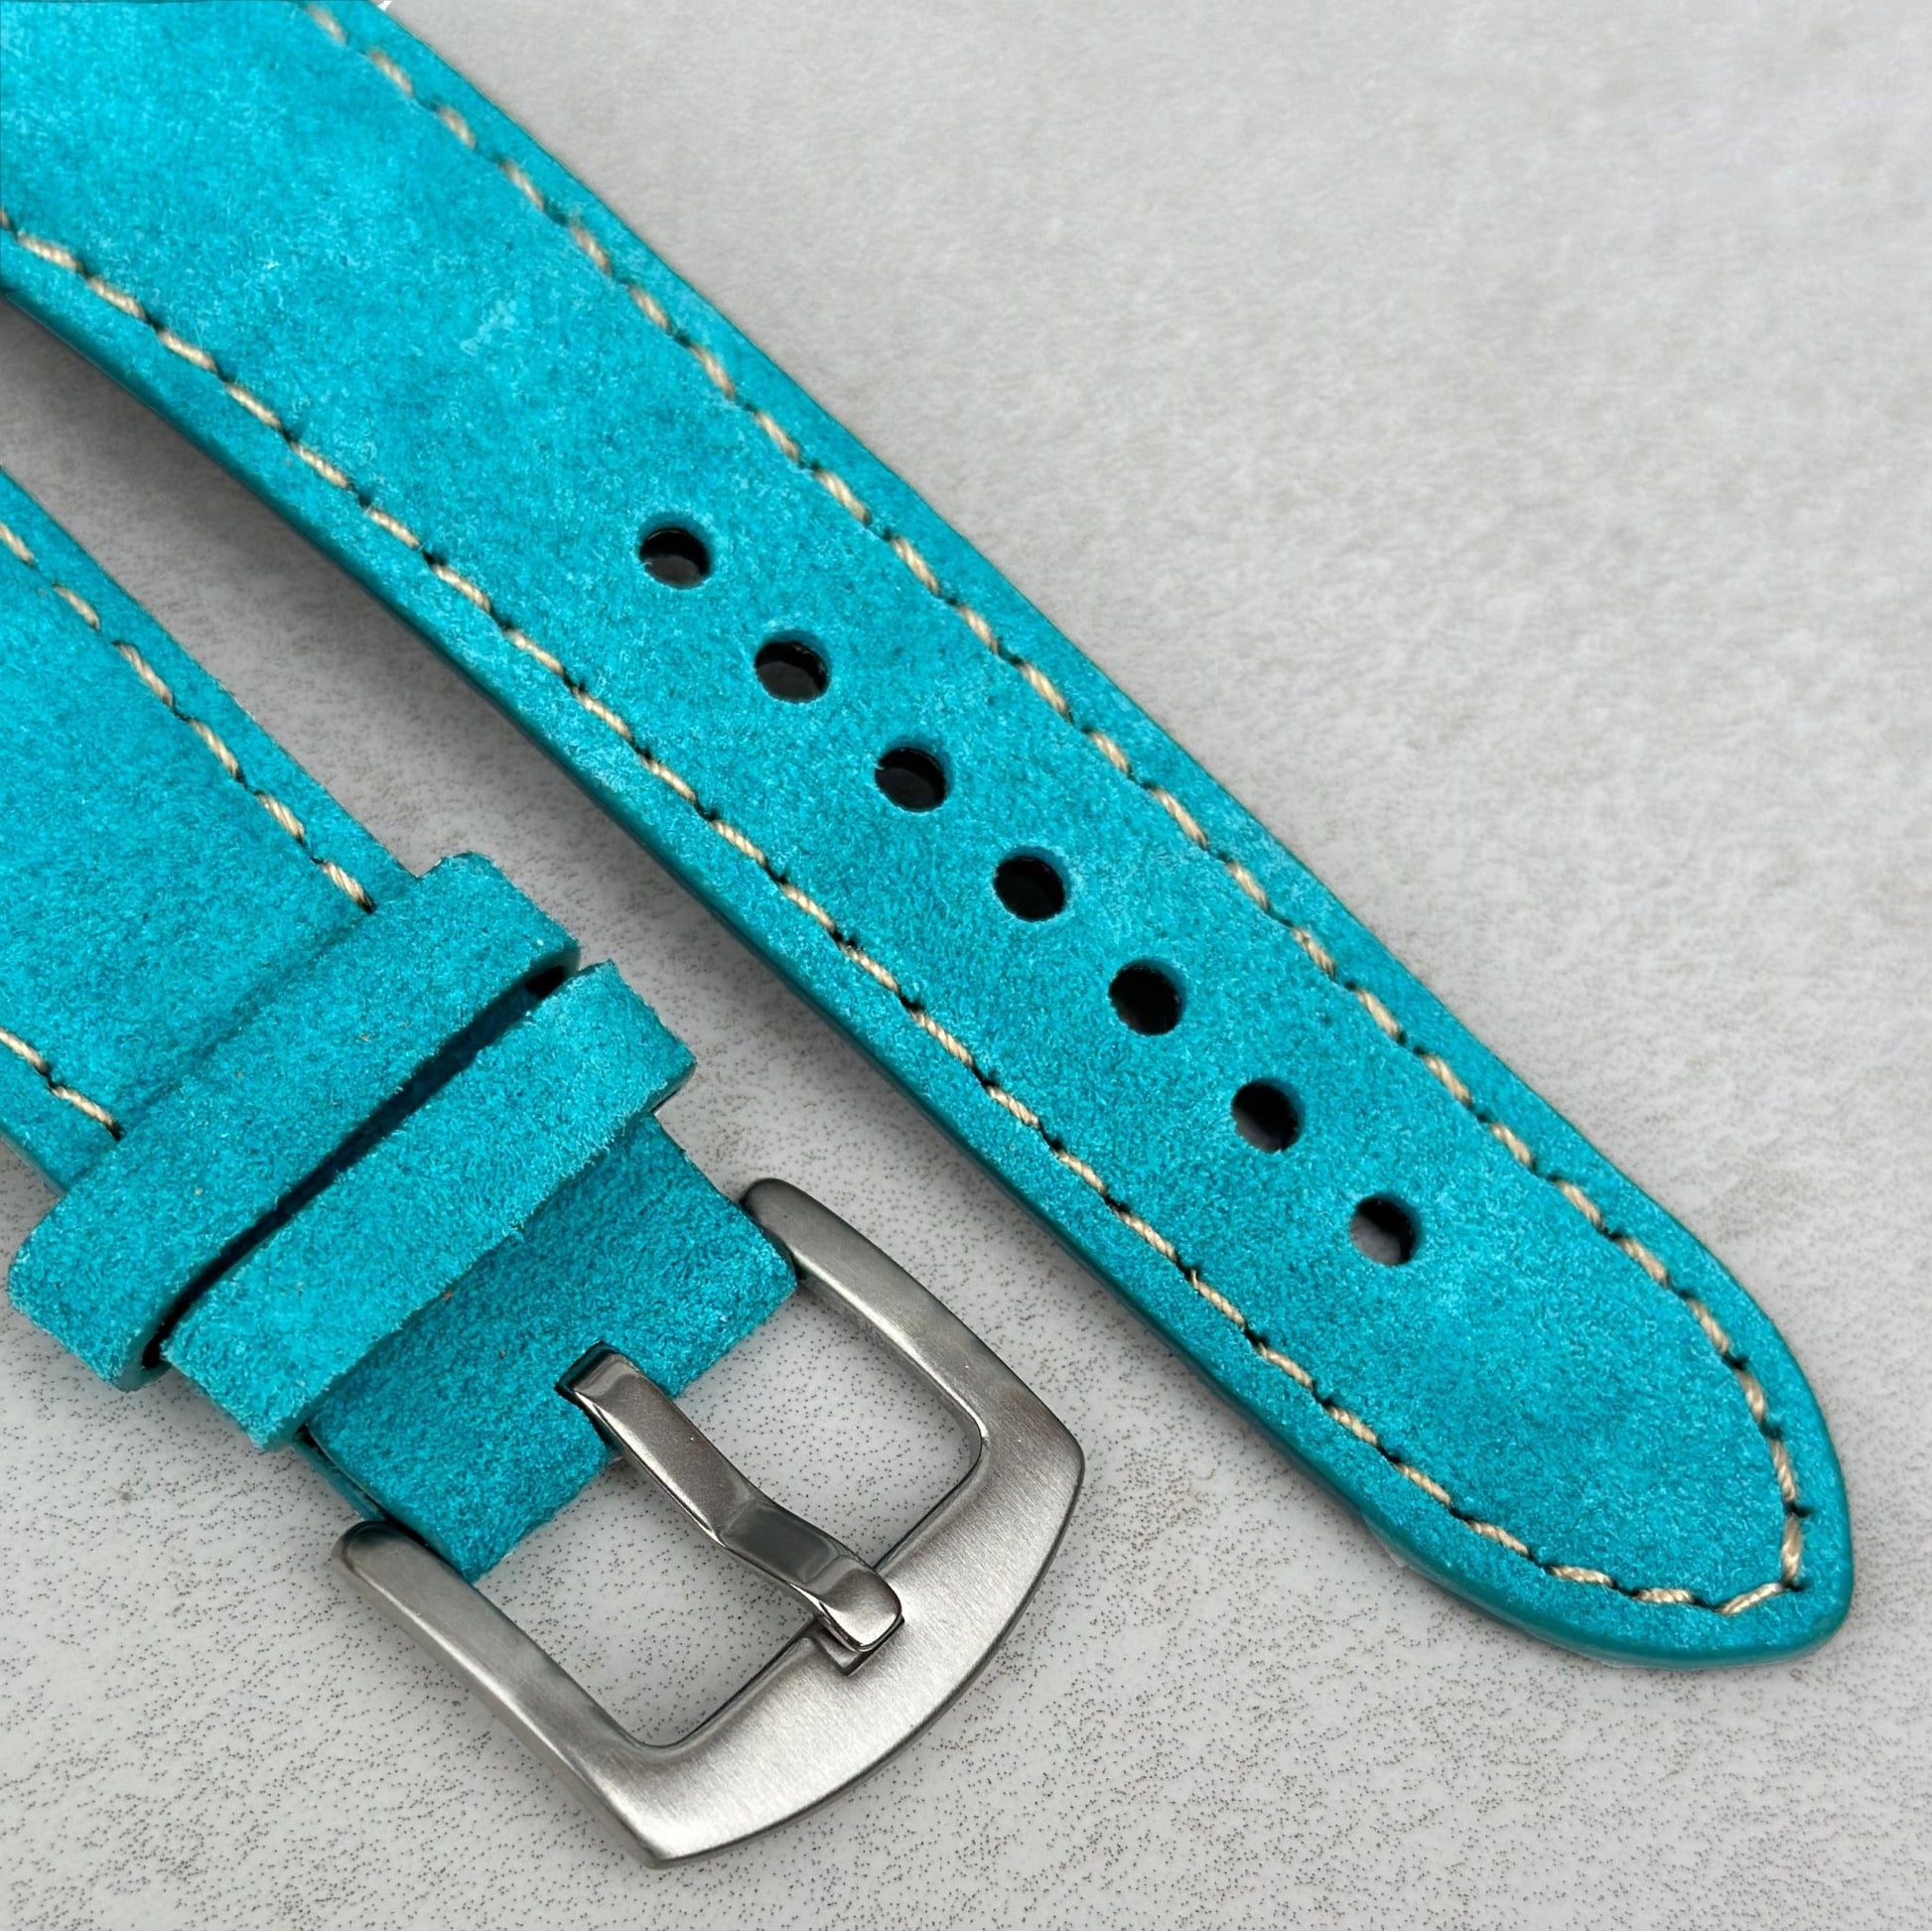 Brushed 316L stainless steel buckle on the Paris turquoise suede watch strap. Watch And Strap